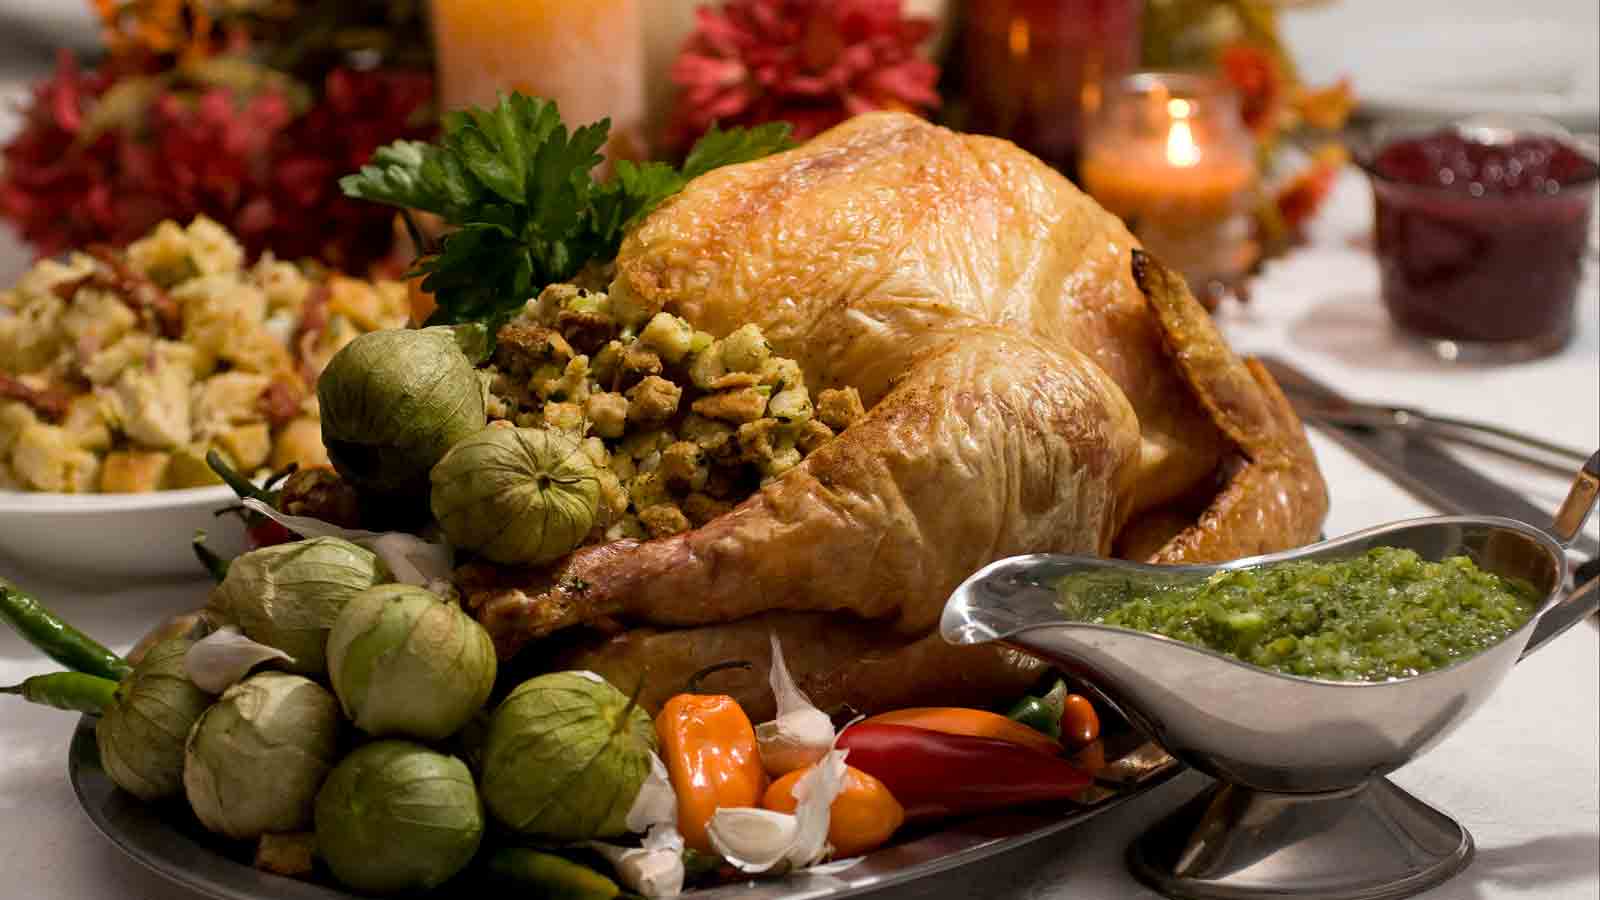 Cost of Thanksgiving dinner in Arizona down 28% from last year